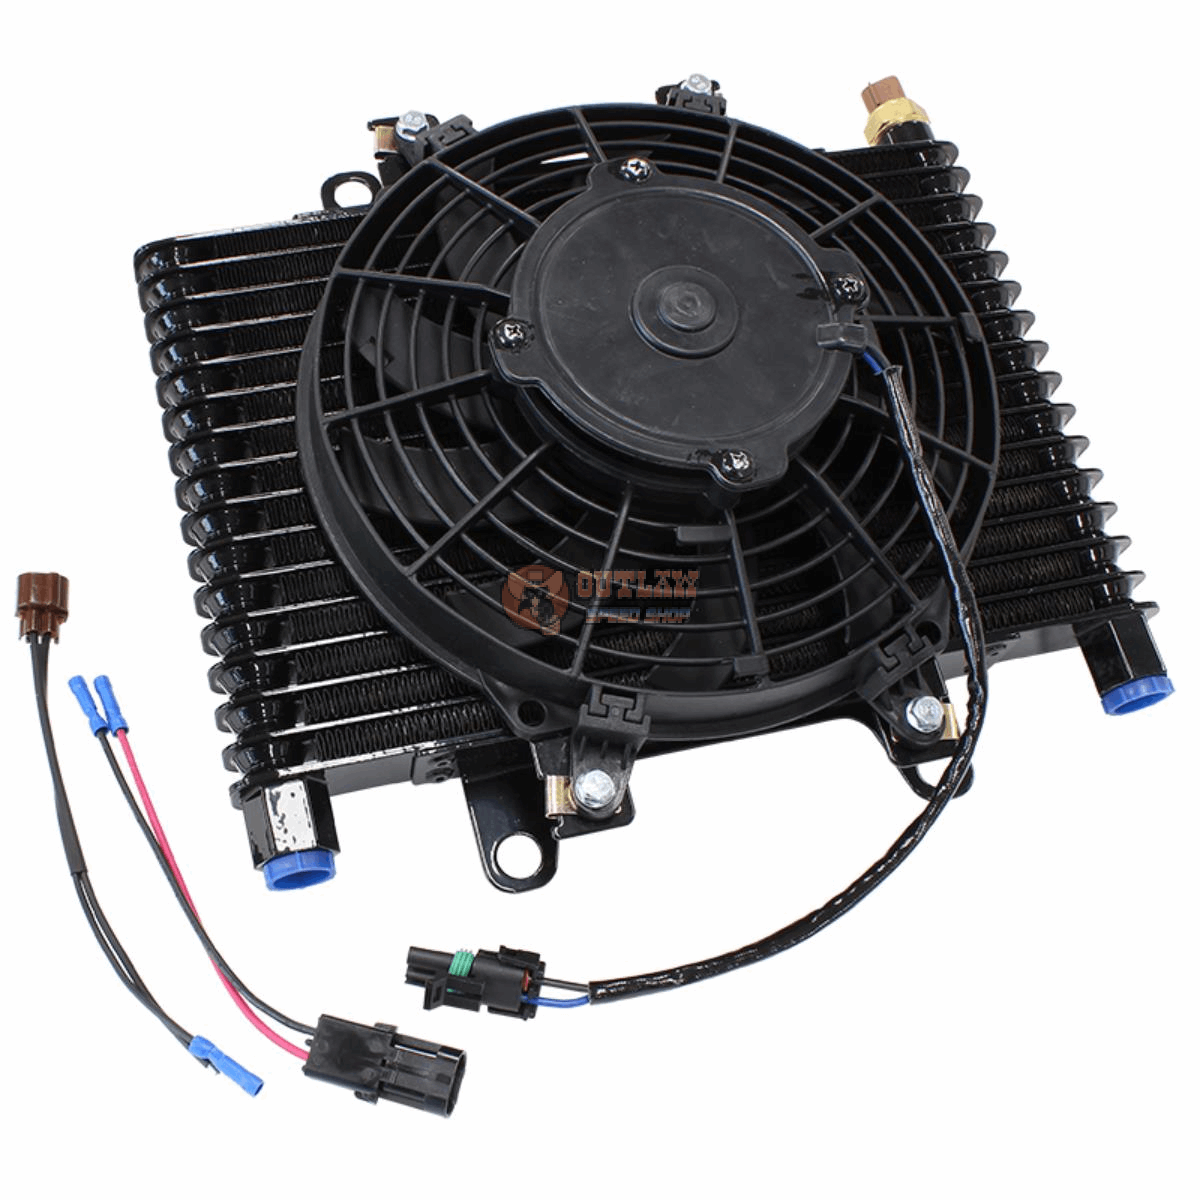 AEROFLOW COMPETITION OIL & TRANSMISSION COOLER WITH FAN -10 OUTLETS